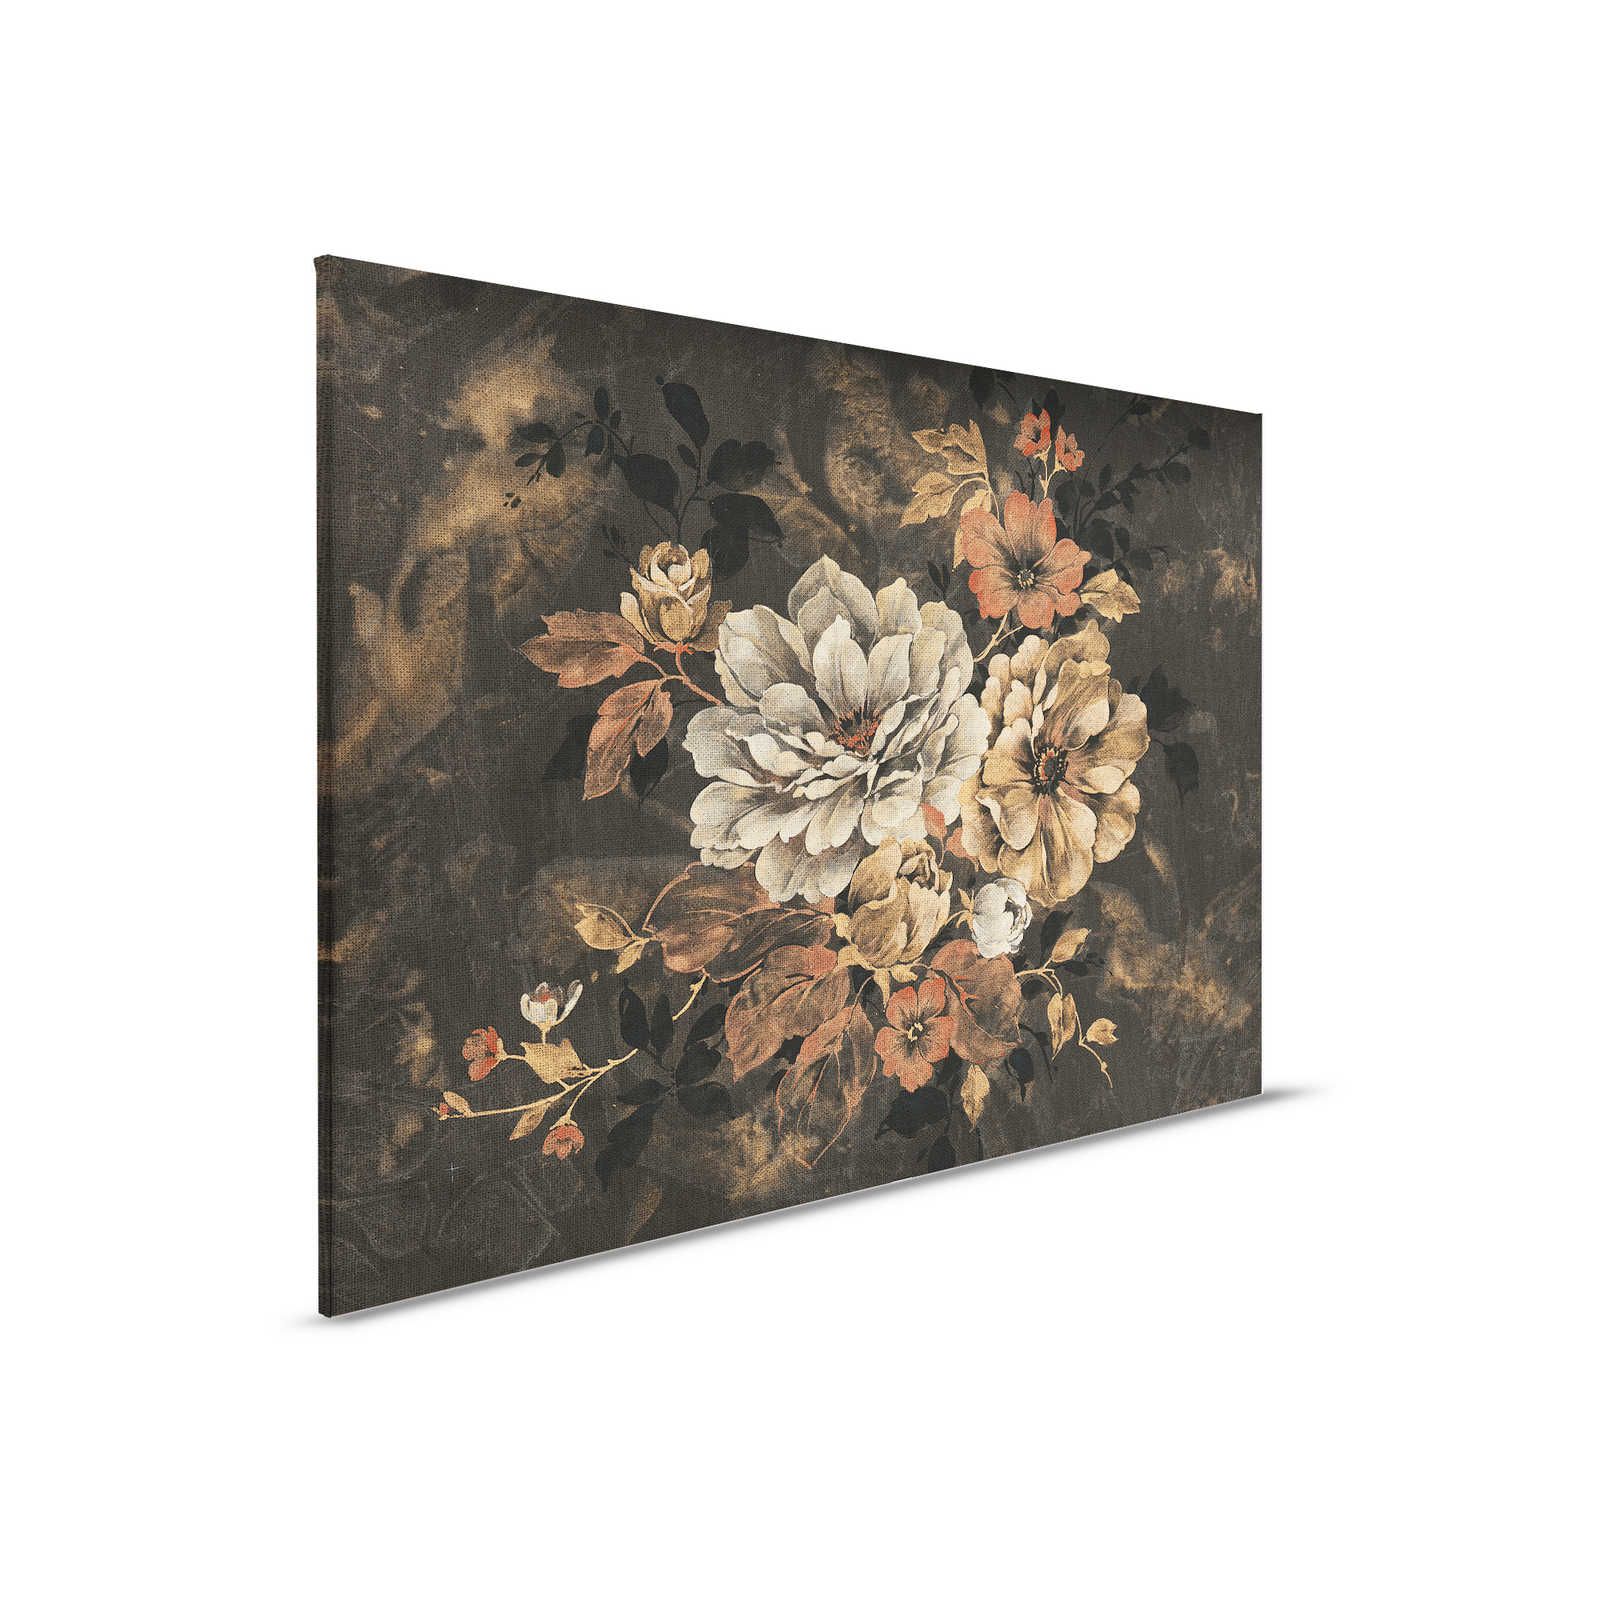 Canvas painting Flower design, oil painting in vintage look - 0.90 m x 0.60 m
